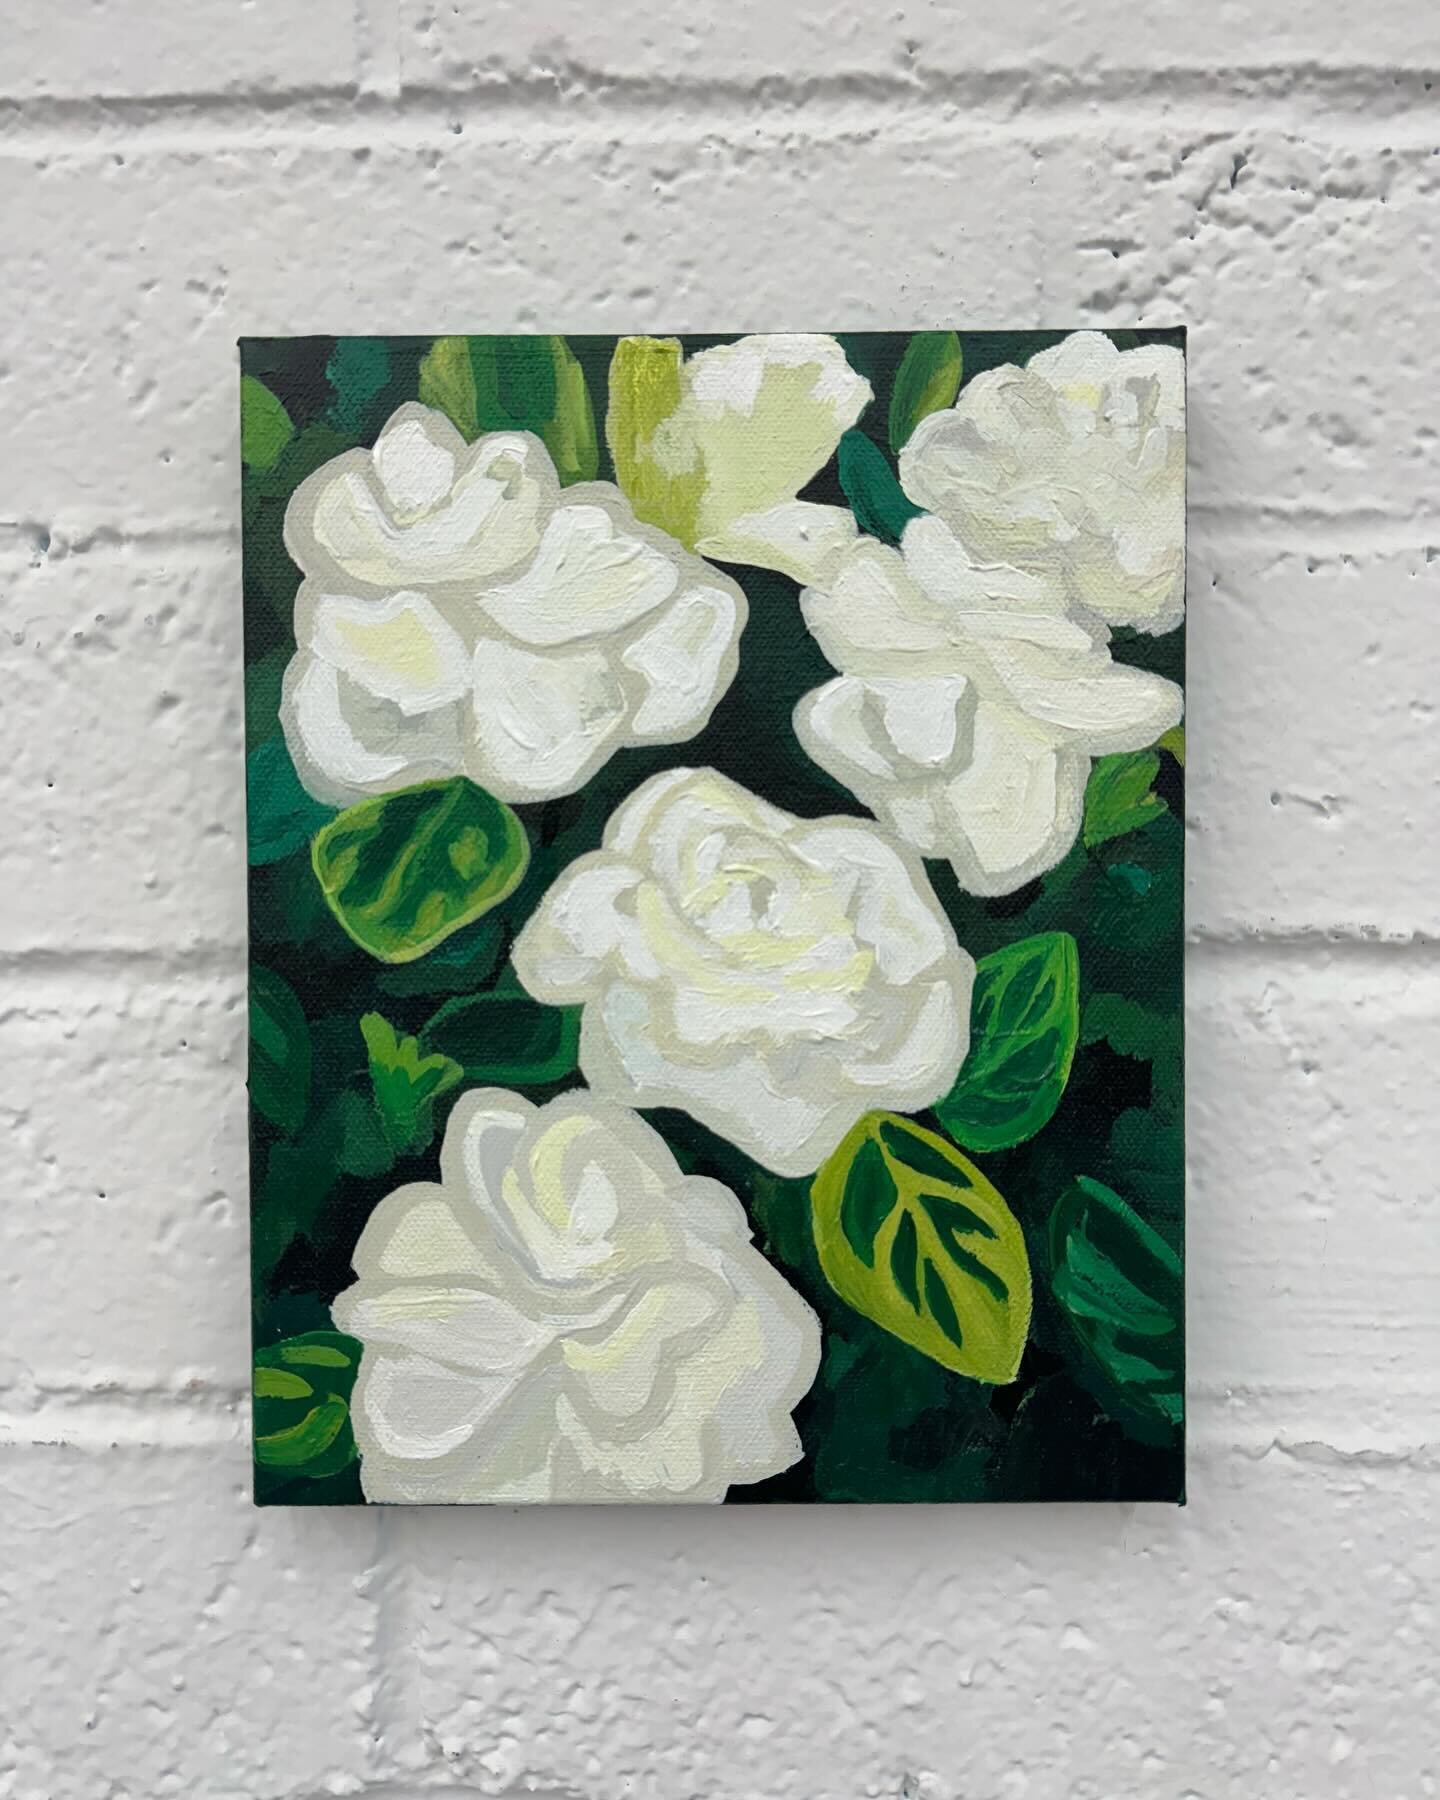 Gardenias - a very meaningful Christmas commishy for a friend for her mom - acrylic on canvas (8x10&rdquo;) 
.
.
.
#instagramart #instaart #instaartist #artofinstagram #instagramartist #painting #acrylicpainting #creativelife #artist #artistsoninstag